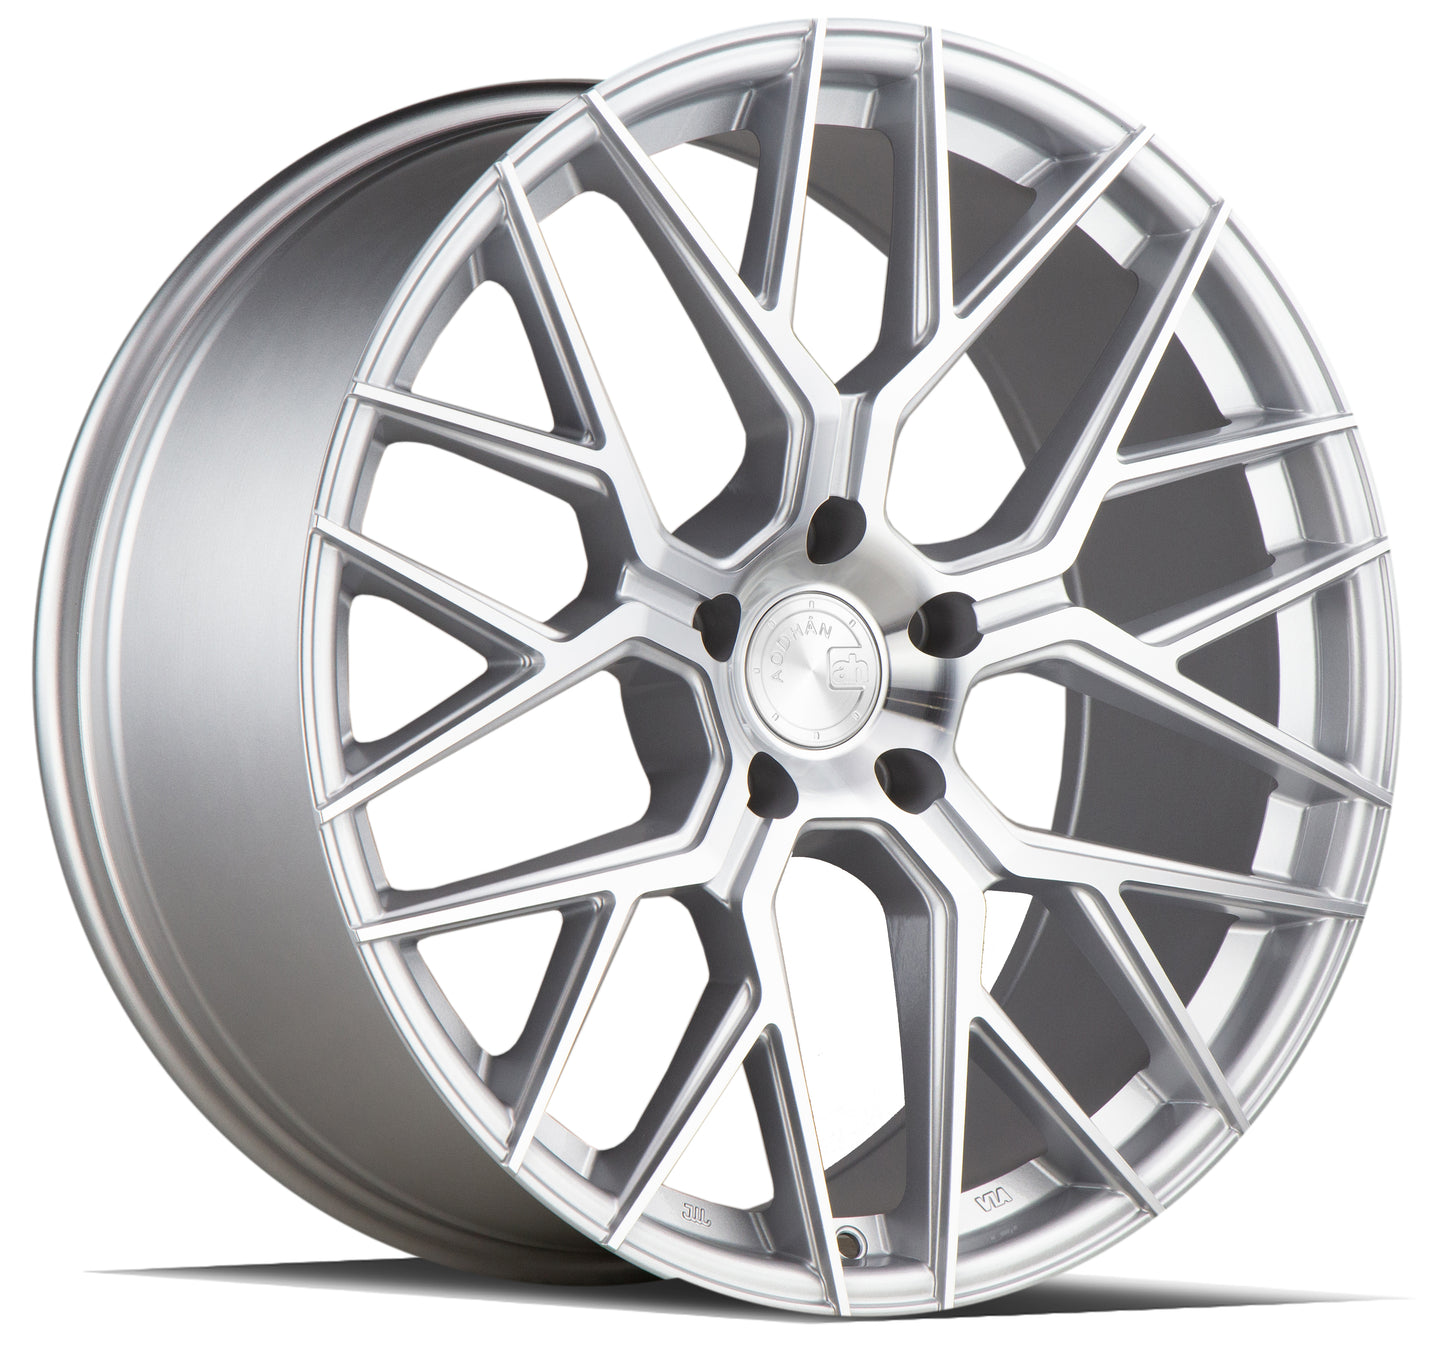 20" Aodhan AFF9 Gloss Silver Machined Face 5x114.3 ( Staggered Setup )